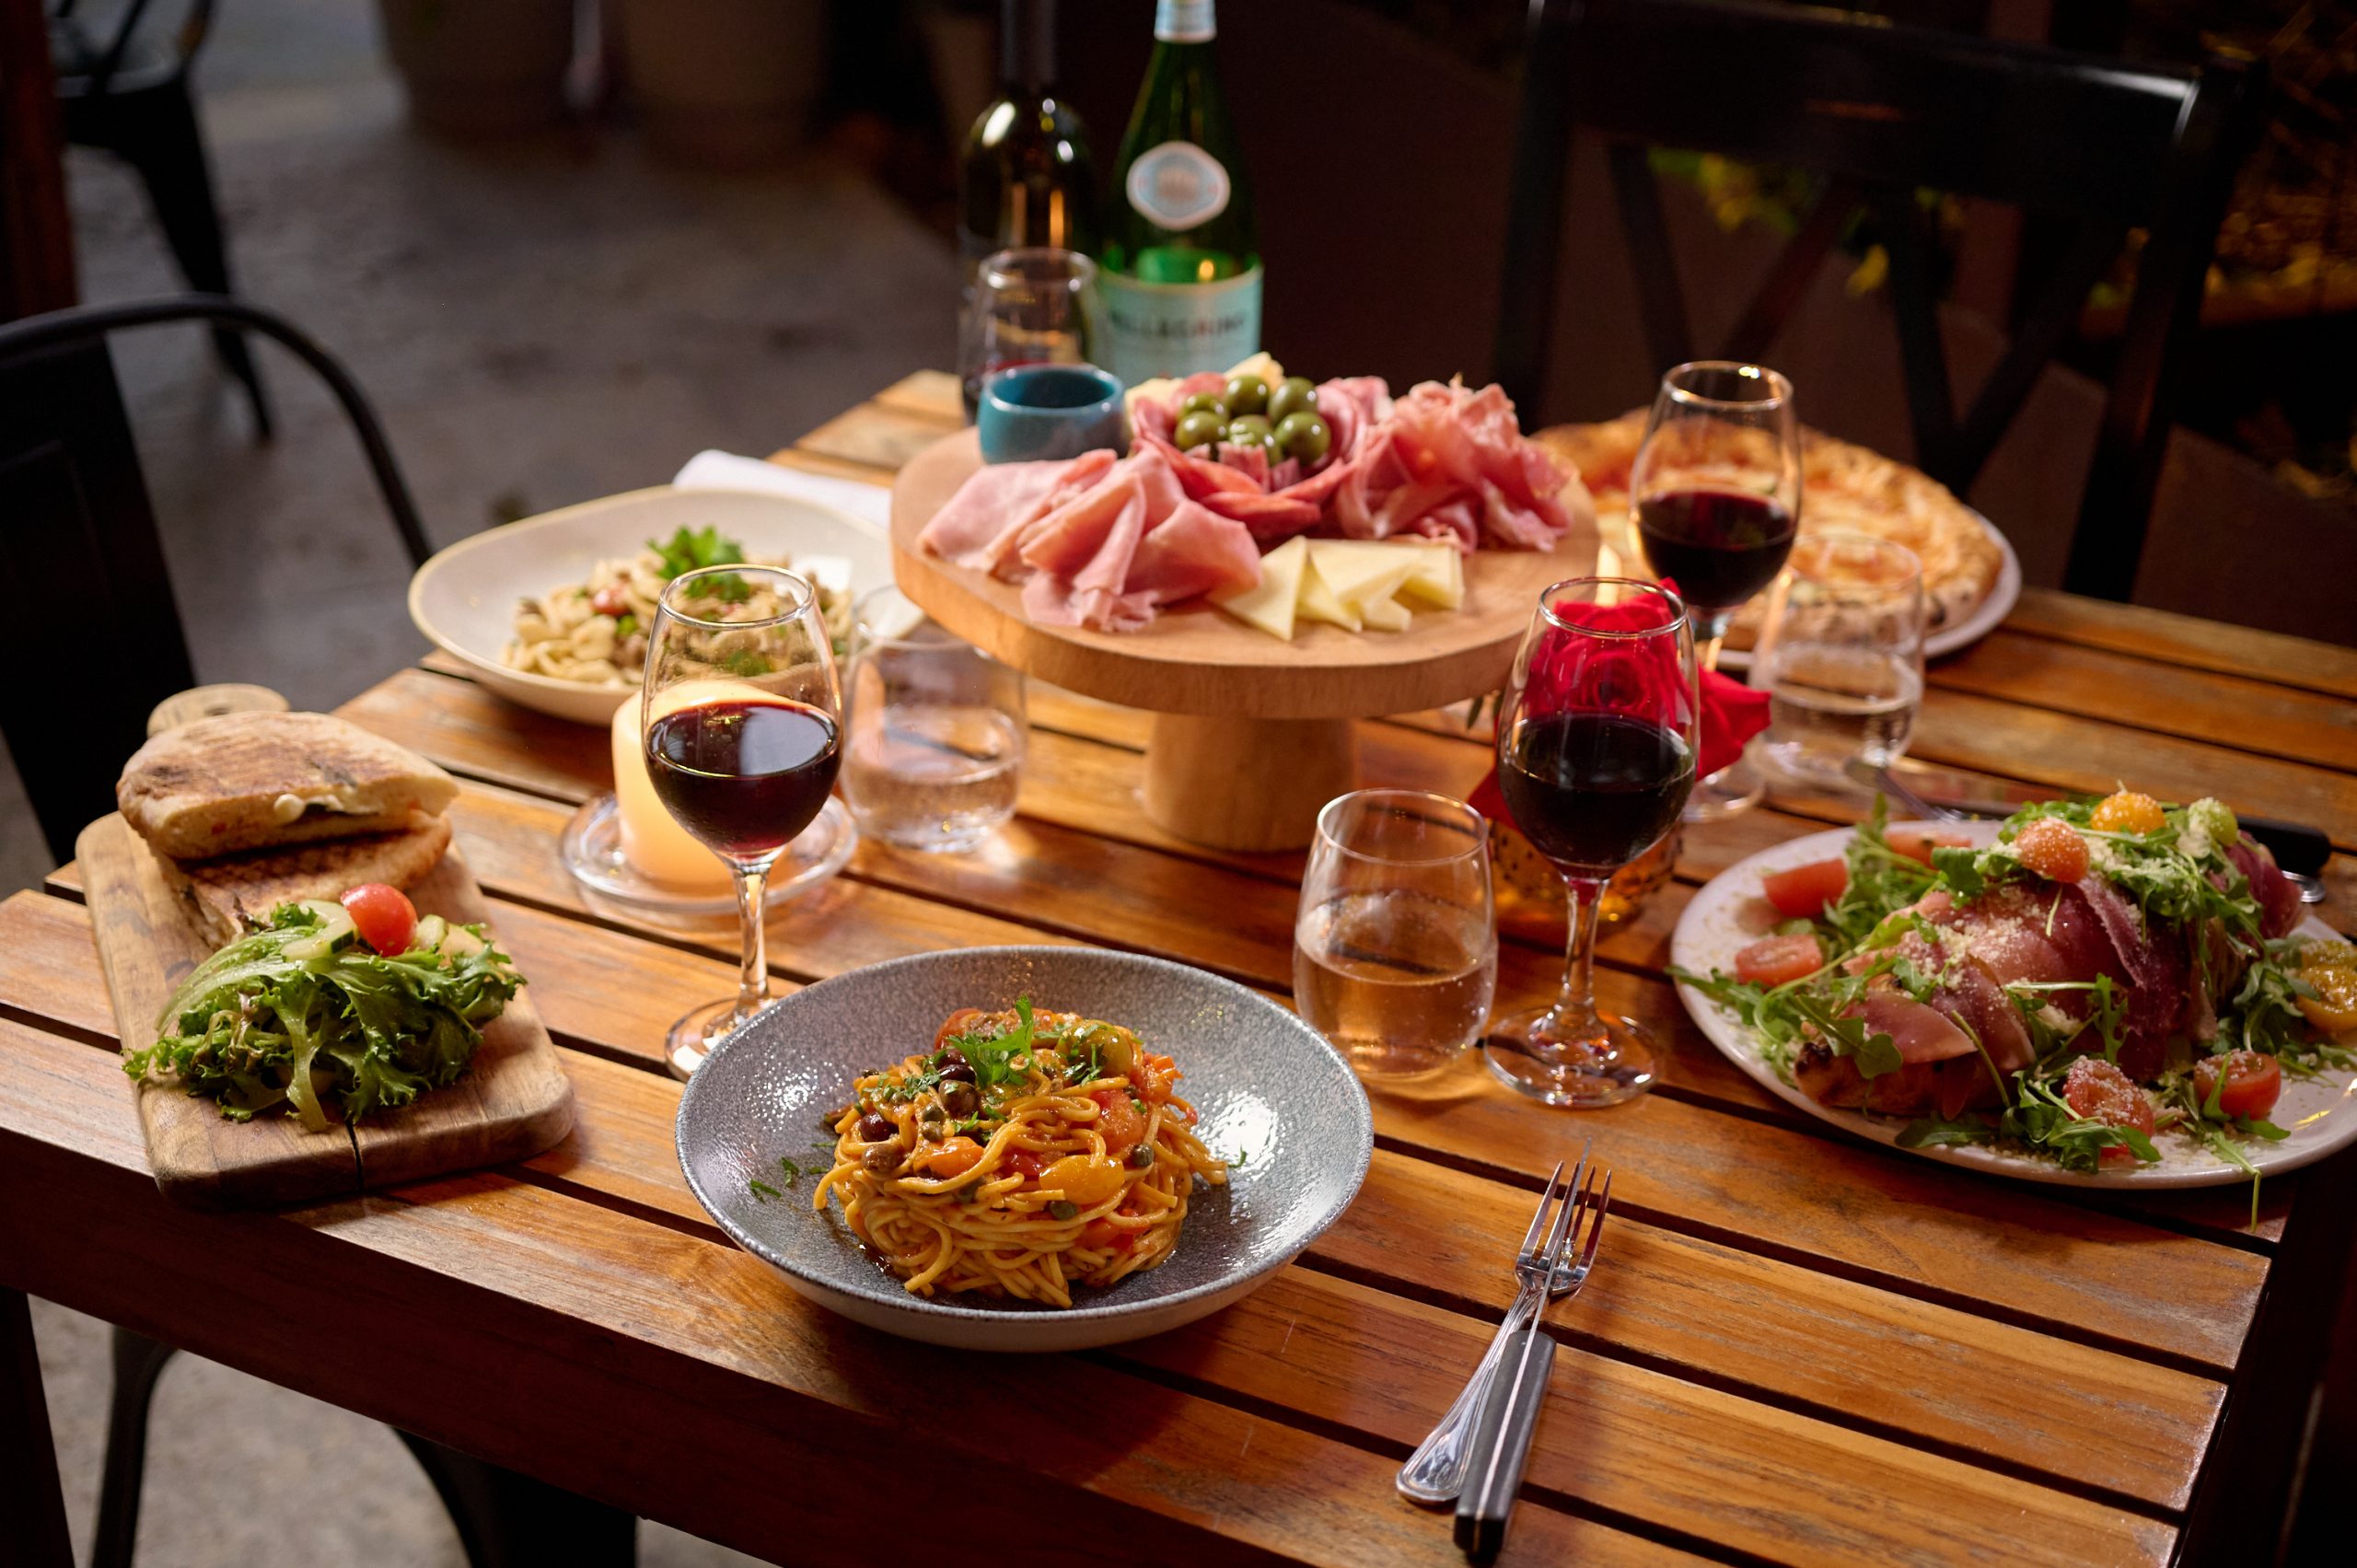 A table at Ironside Pizza, family style restaurant in Miami adorned with plates of Italian food and glasses of wine.